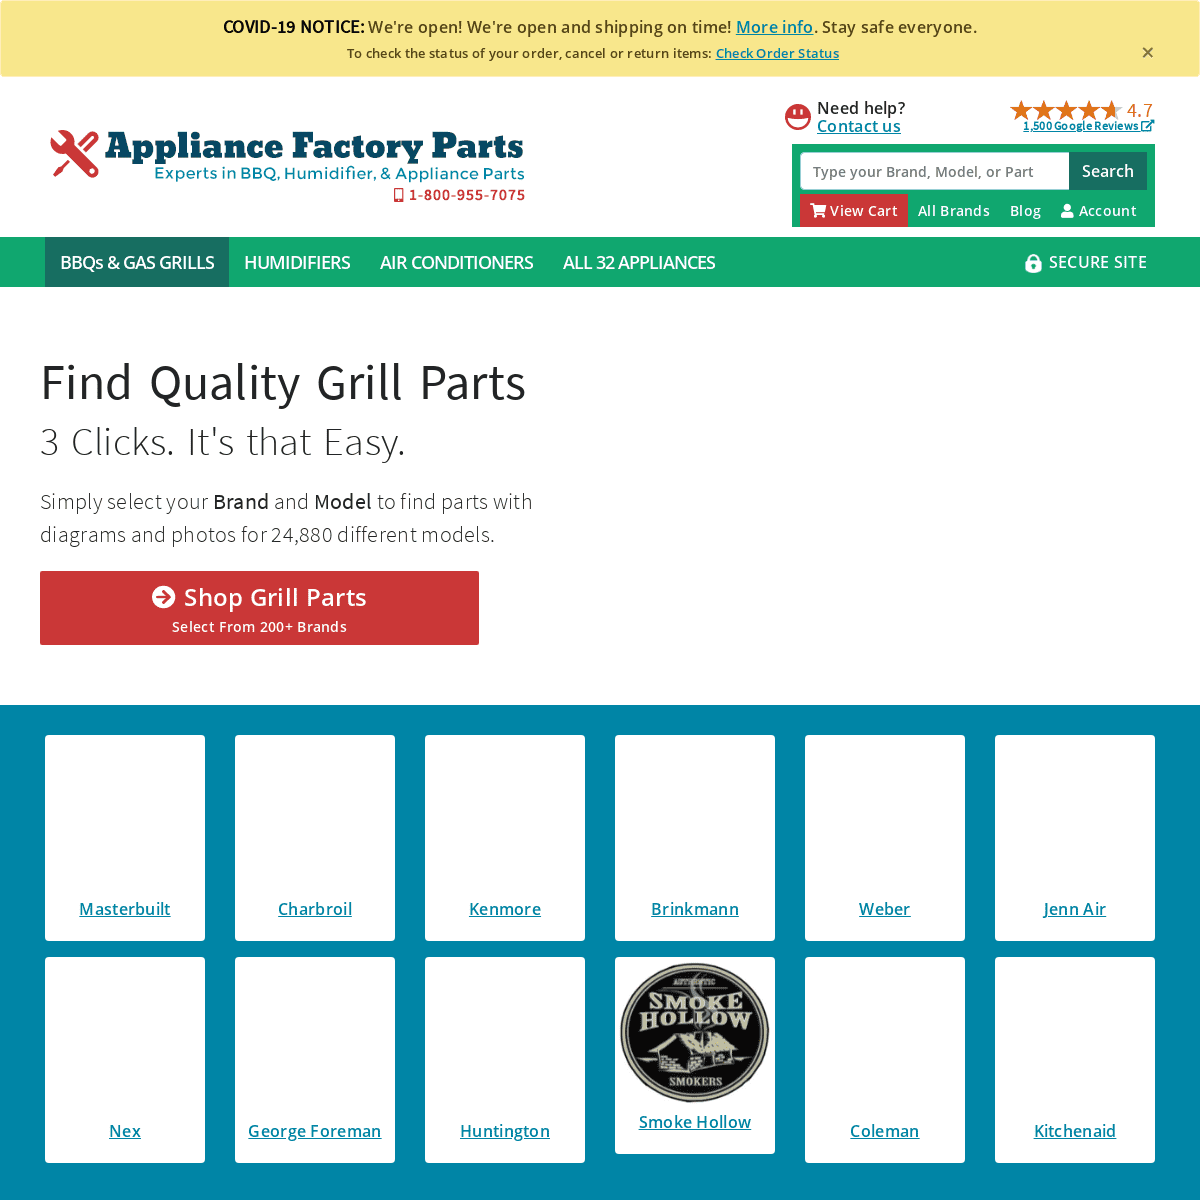 A complete backup of https://appliancefactoryparts.com